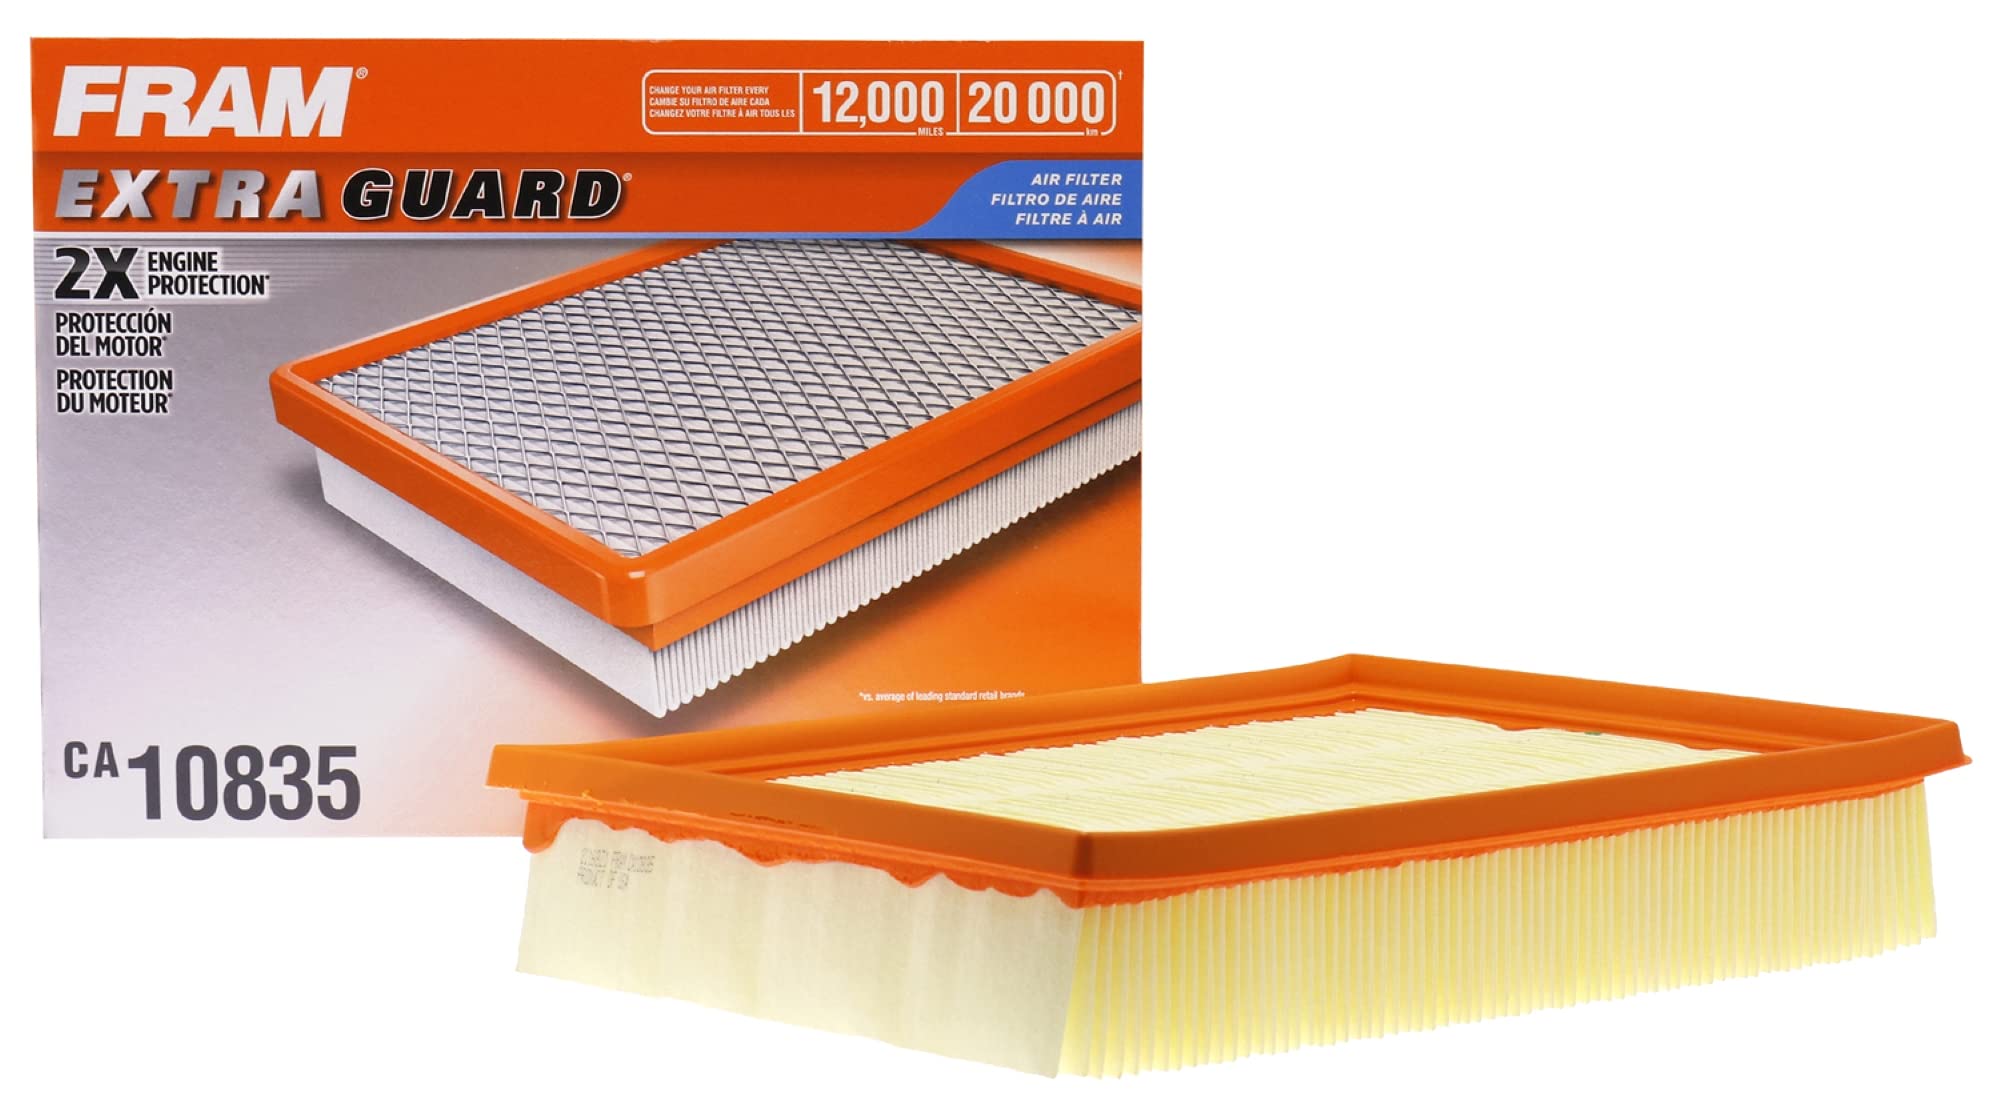 FRAM Extra Guard CA10835 Replacement Engine Air Filter for Select Lexus and Toyota Models, Provides Up to 12 Months or 12,000 Miles Filter Protection